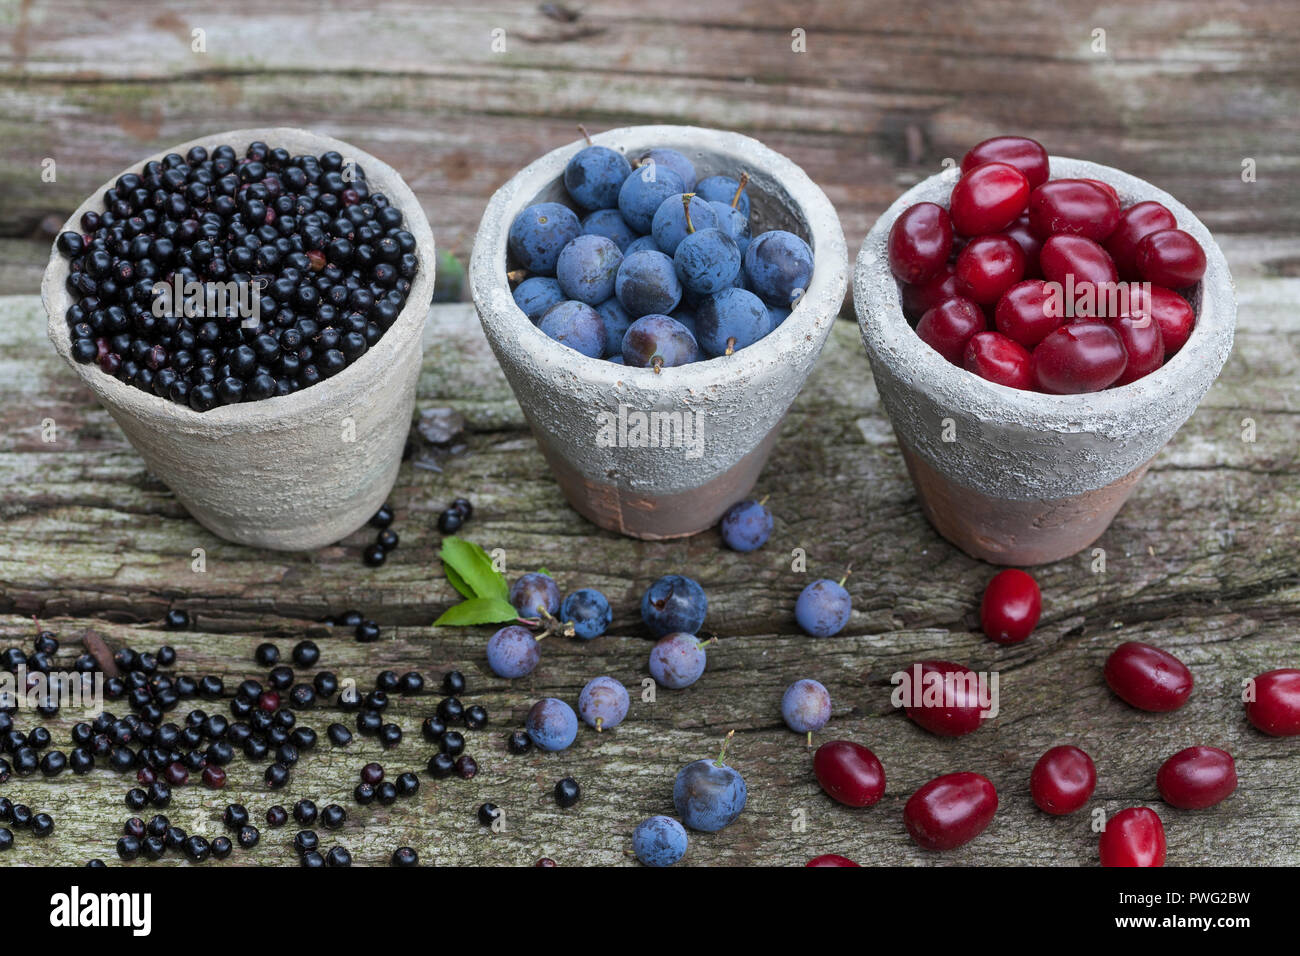 Sloe Recipes High Resolution Stock Photography and Images - Alamy